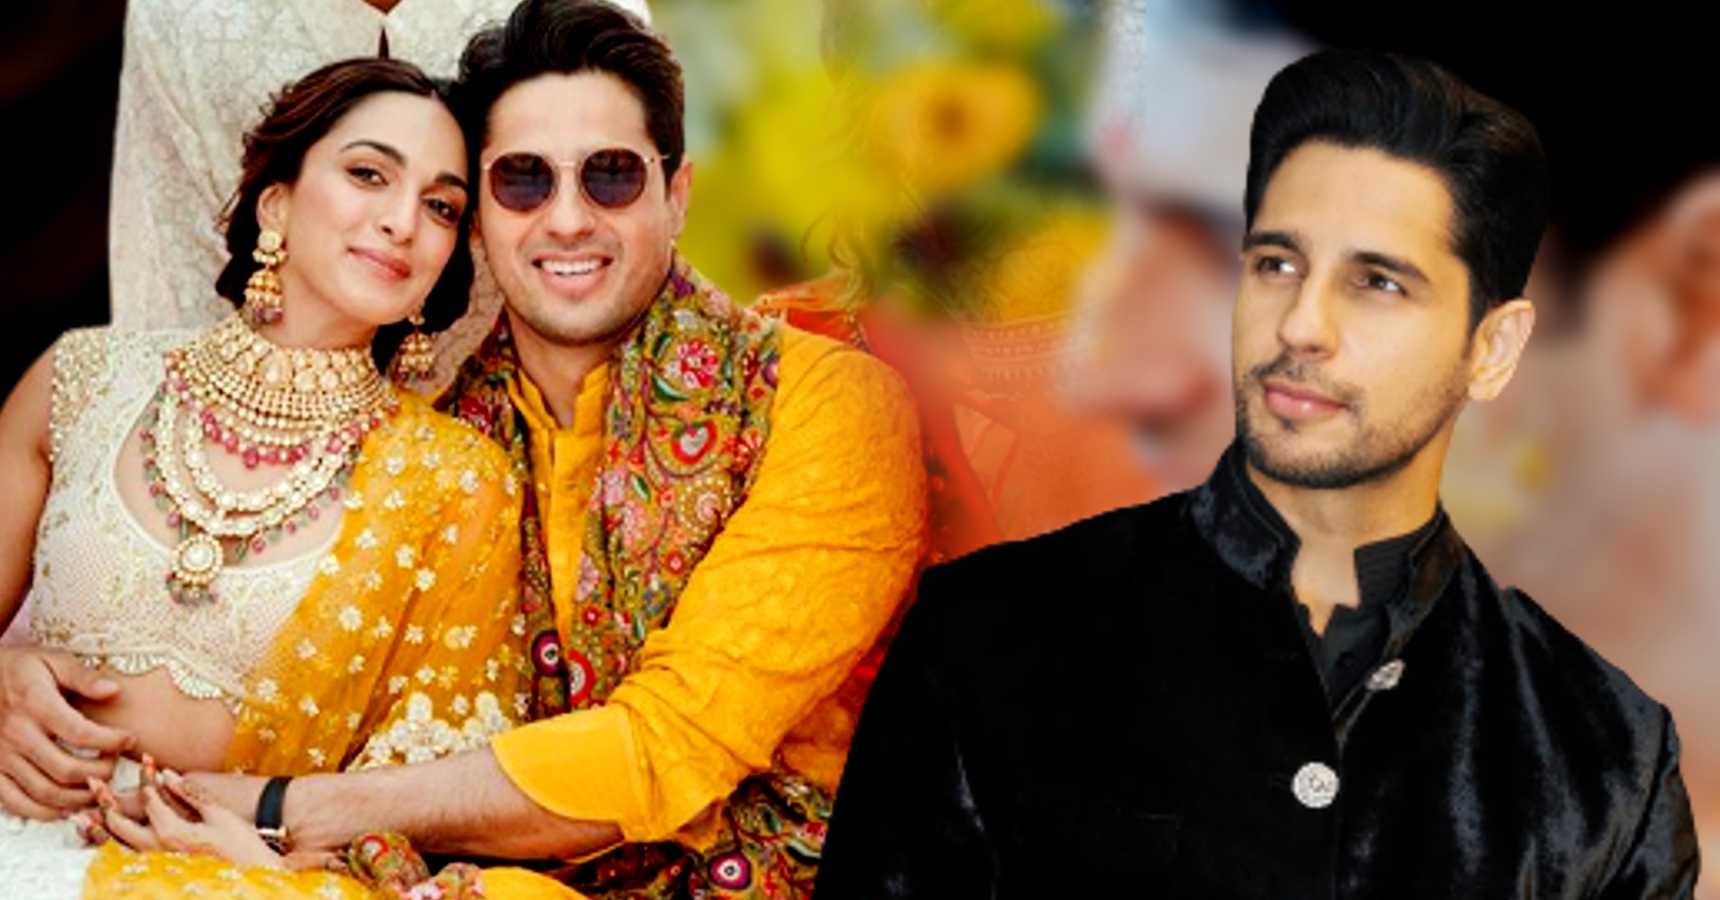 Bollywood actor Sidharth Malhotra opens up about his 5 months married life with Kiara Advani